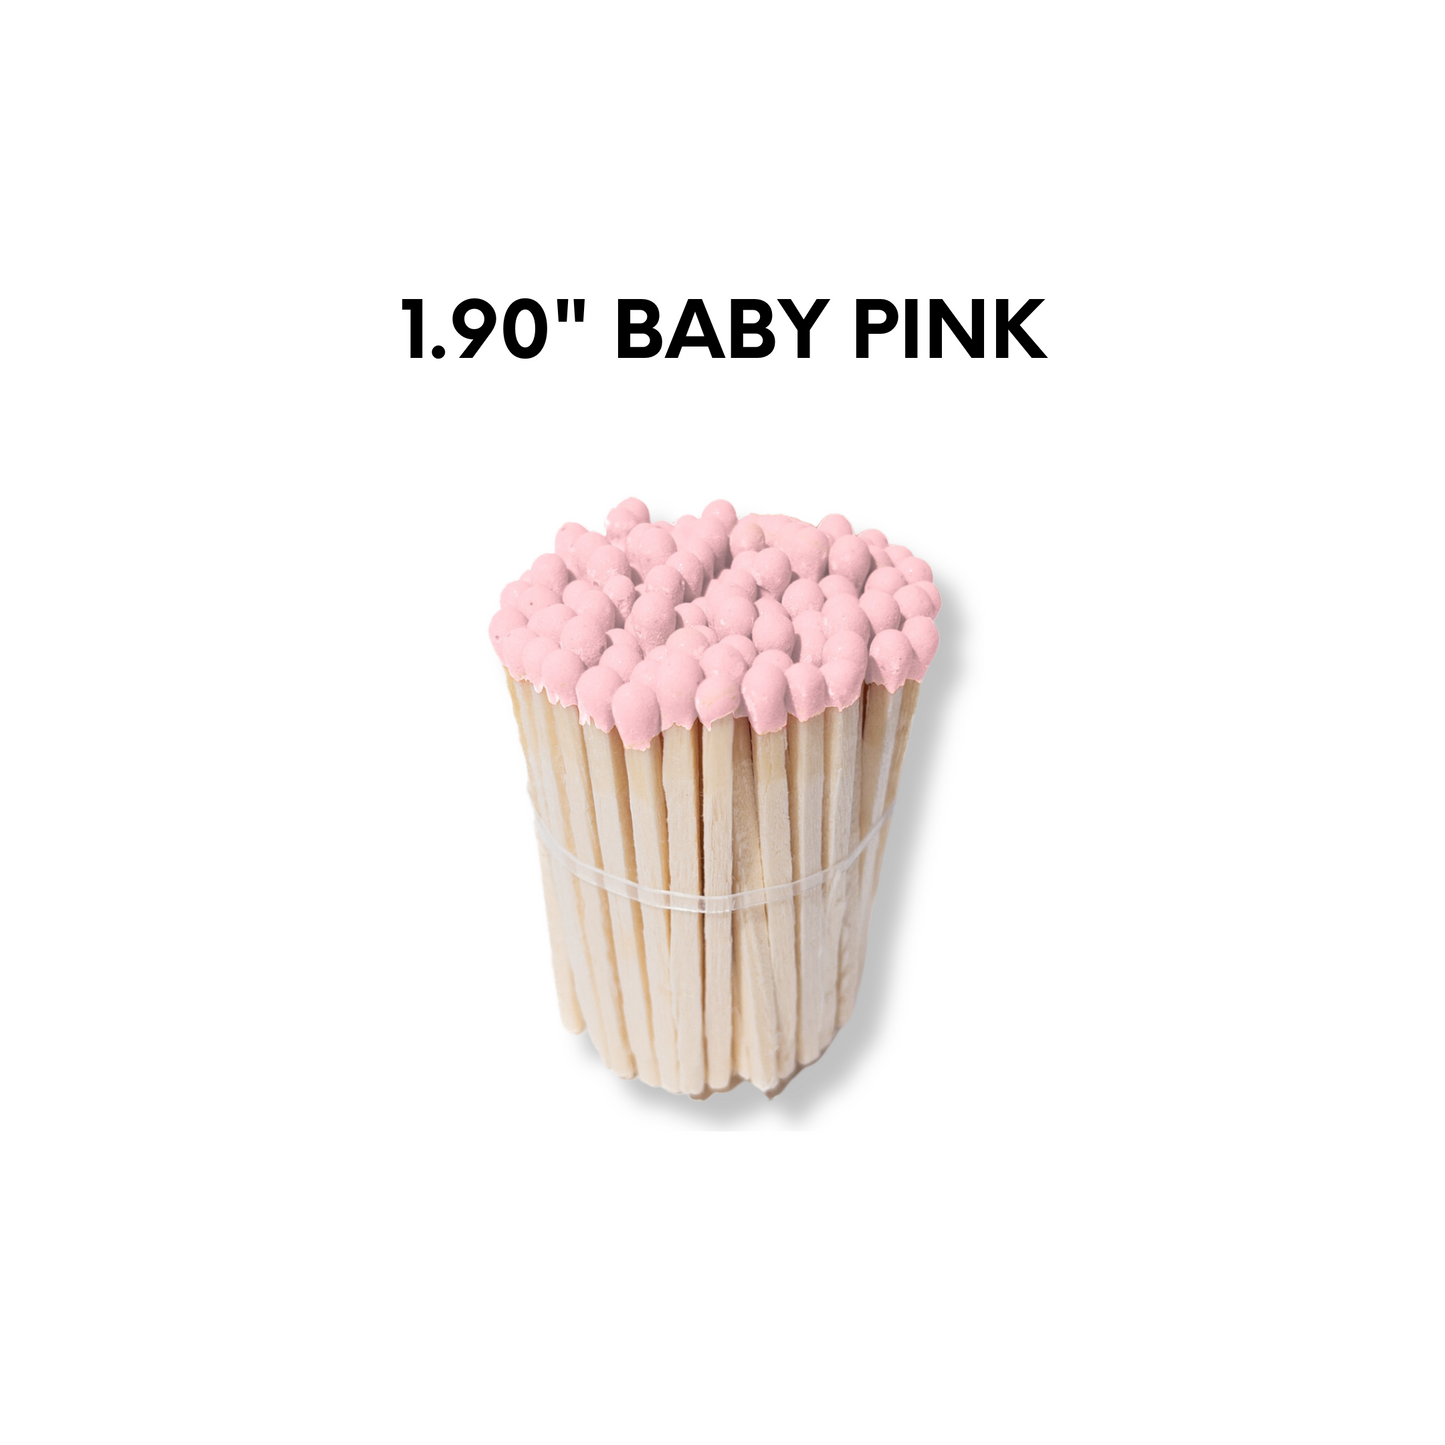 Baby Pink 1.90" - Safety Matches